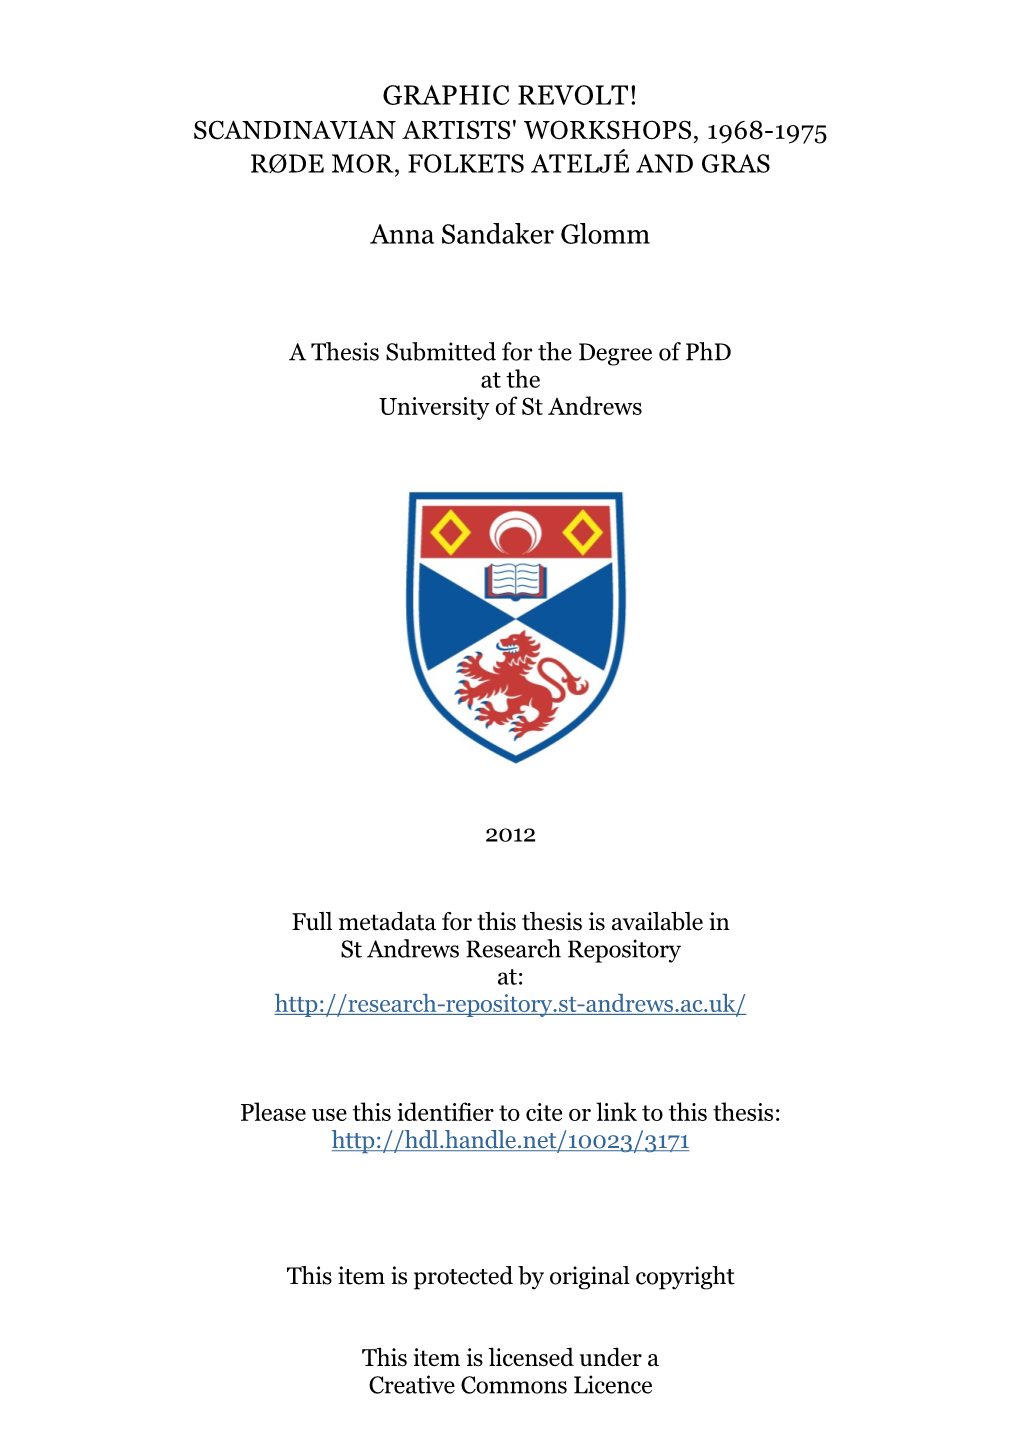 Anna S. Glomm Phd Thesis